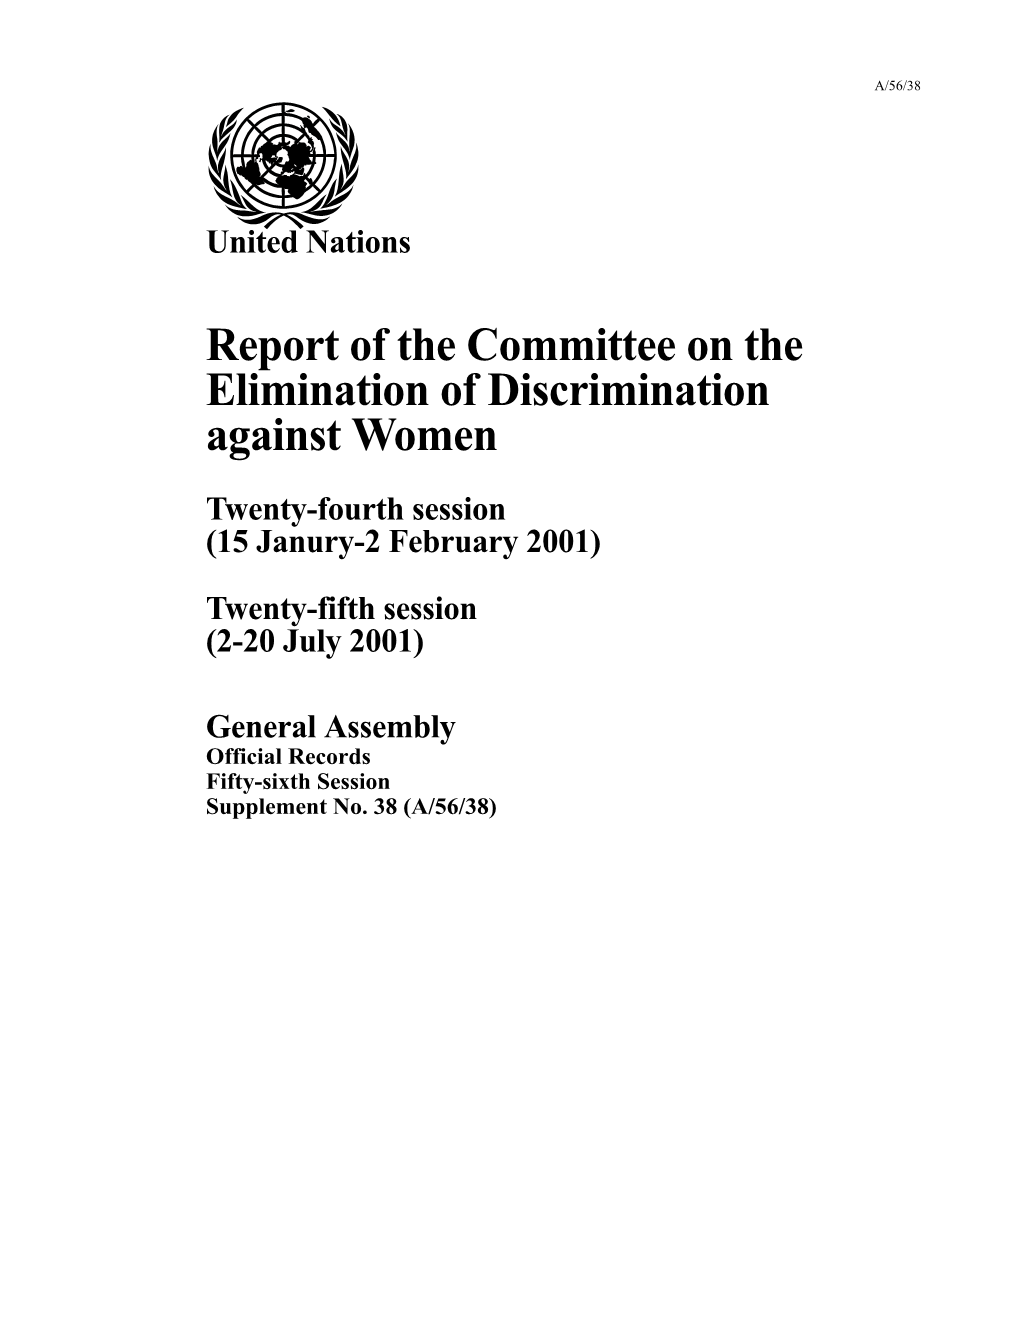 United Nations Report of the Committee on The